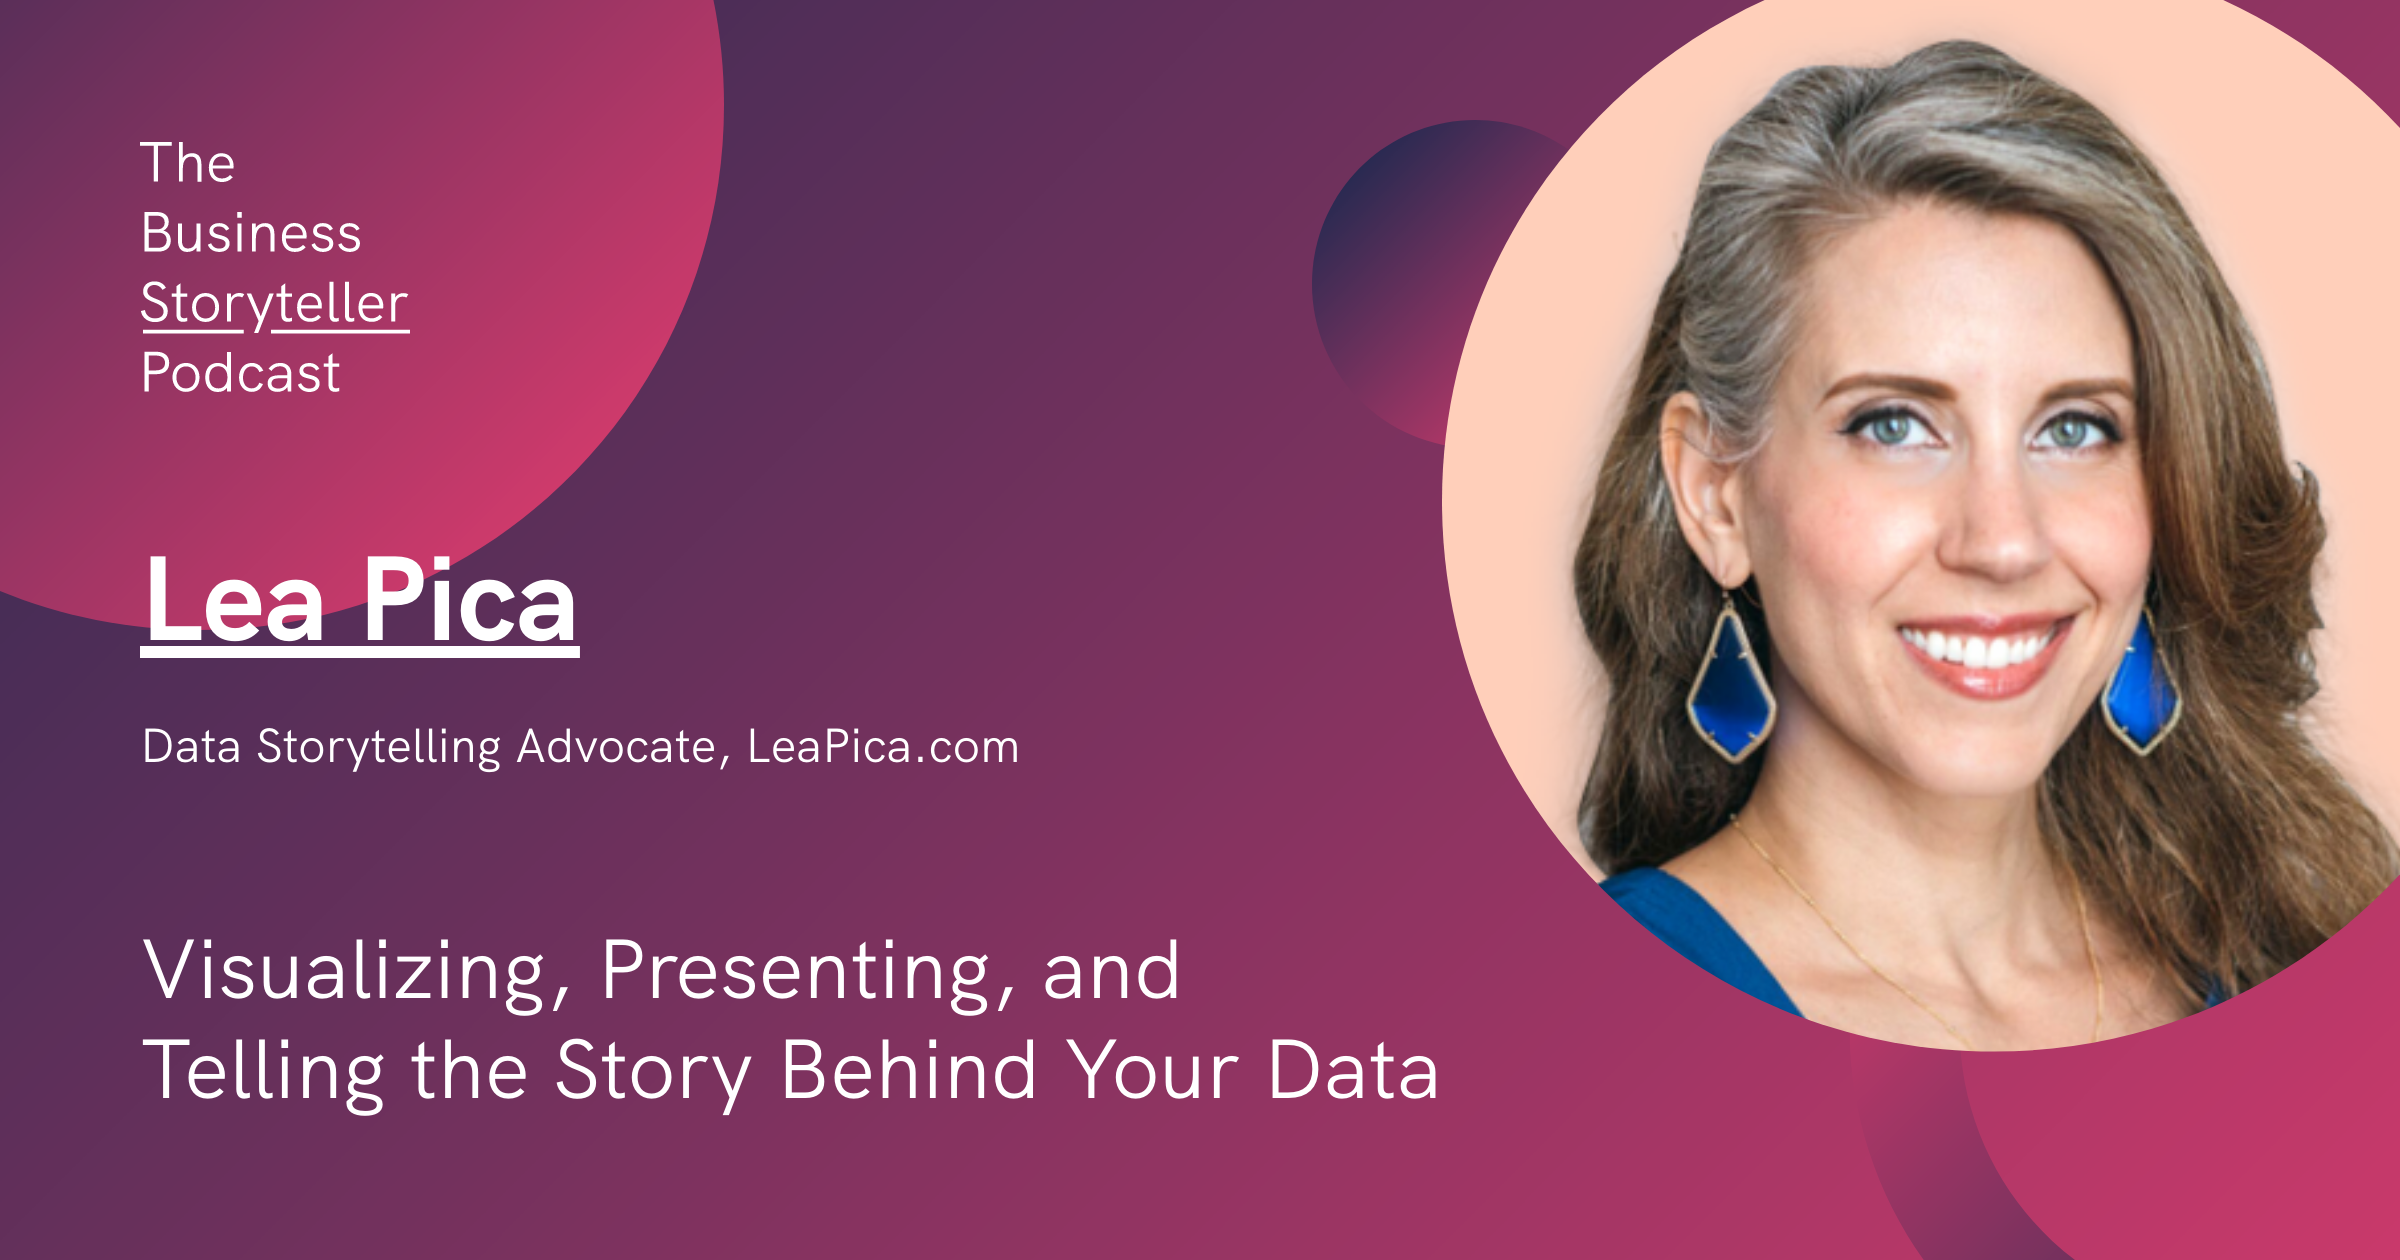 the business storyteller podcast featuring lea pica